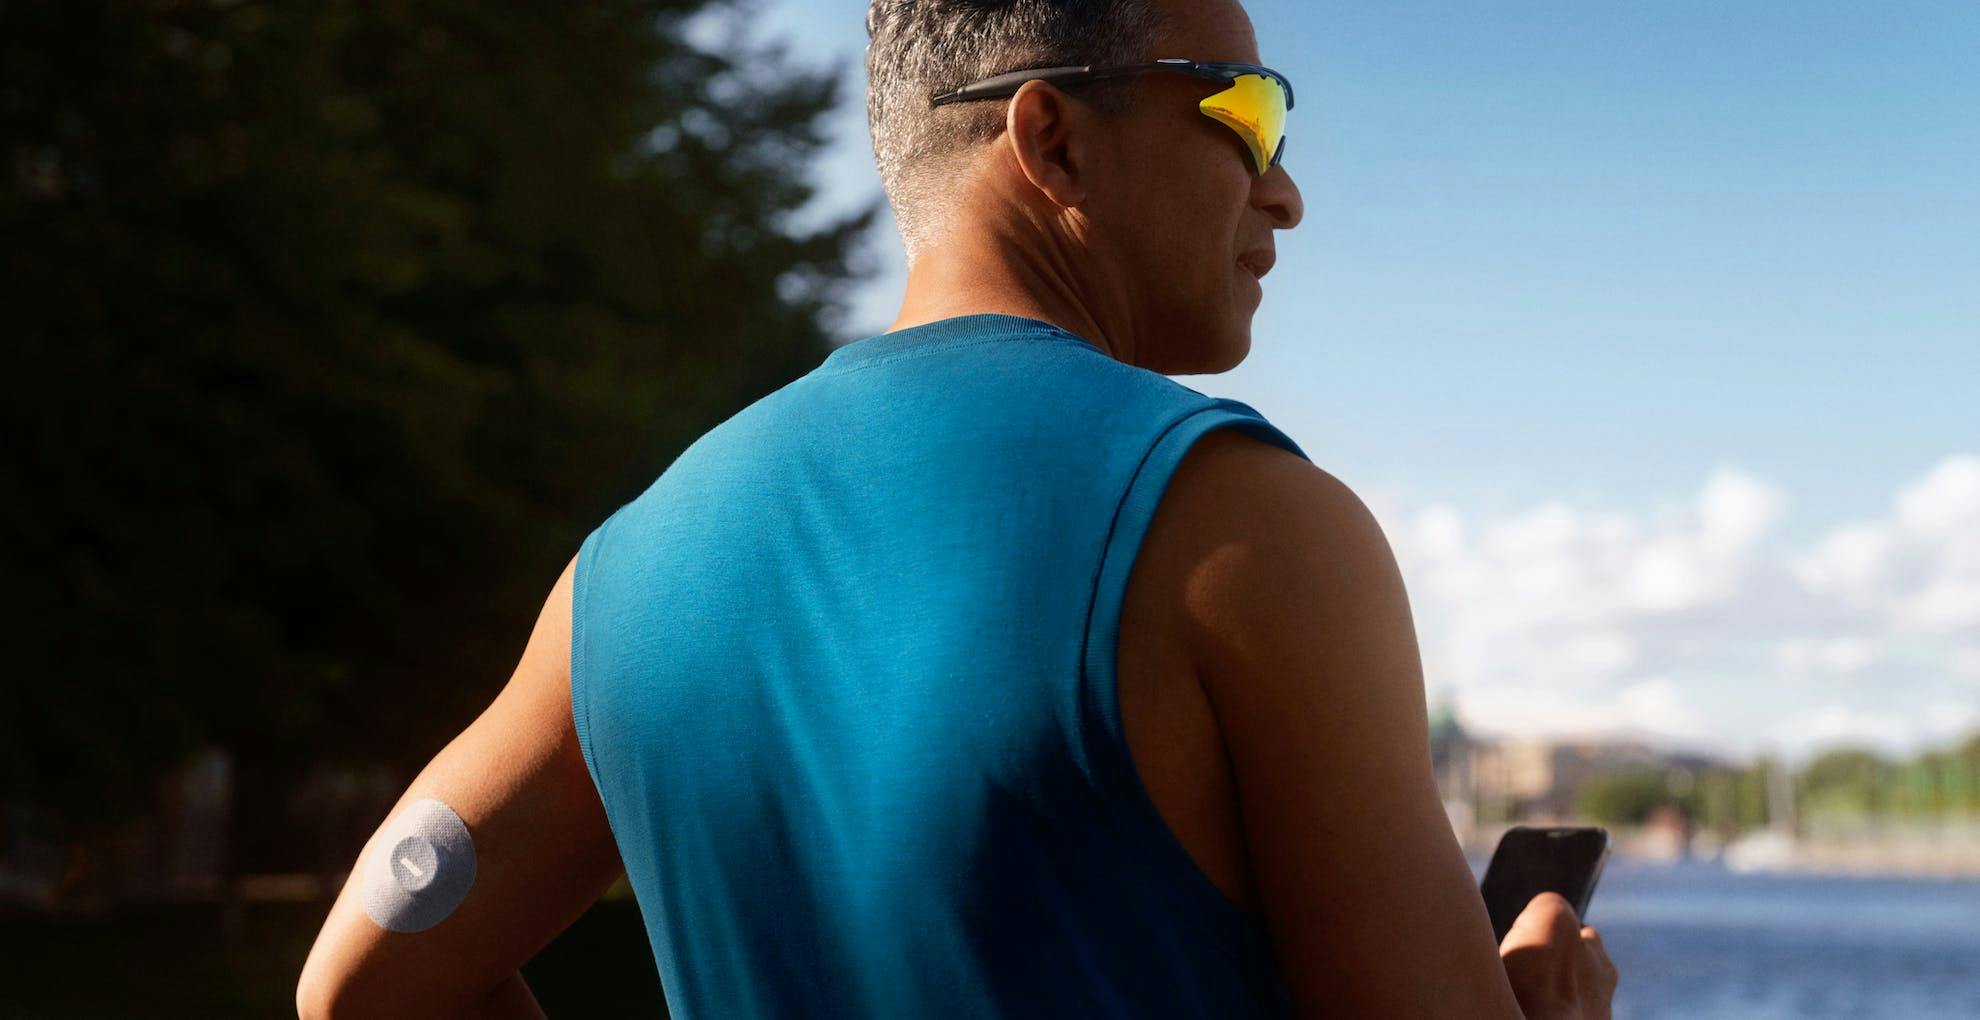 man wearing continuous glucose monitor preparing to go on an outdoor run